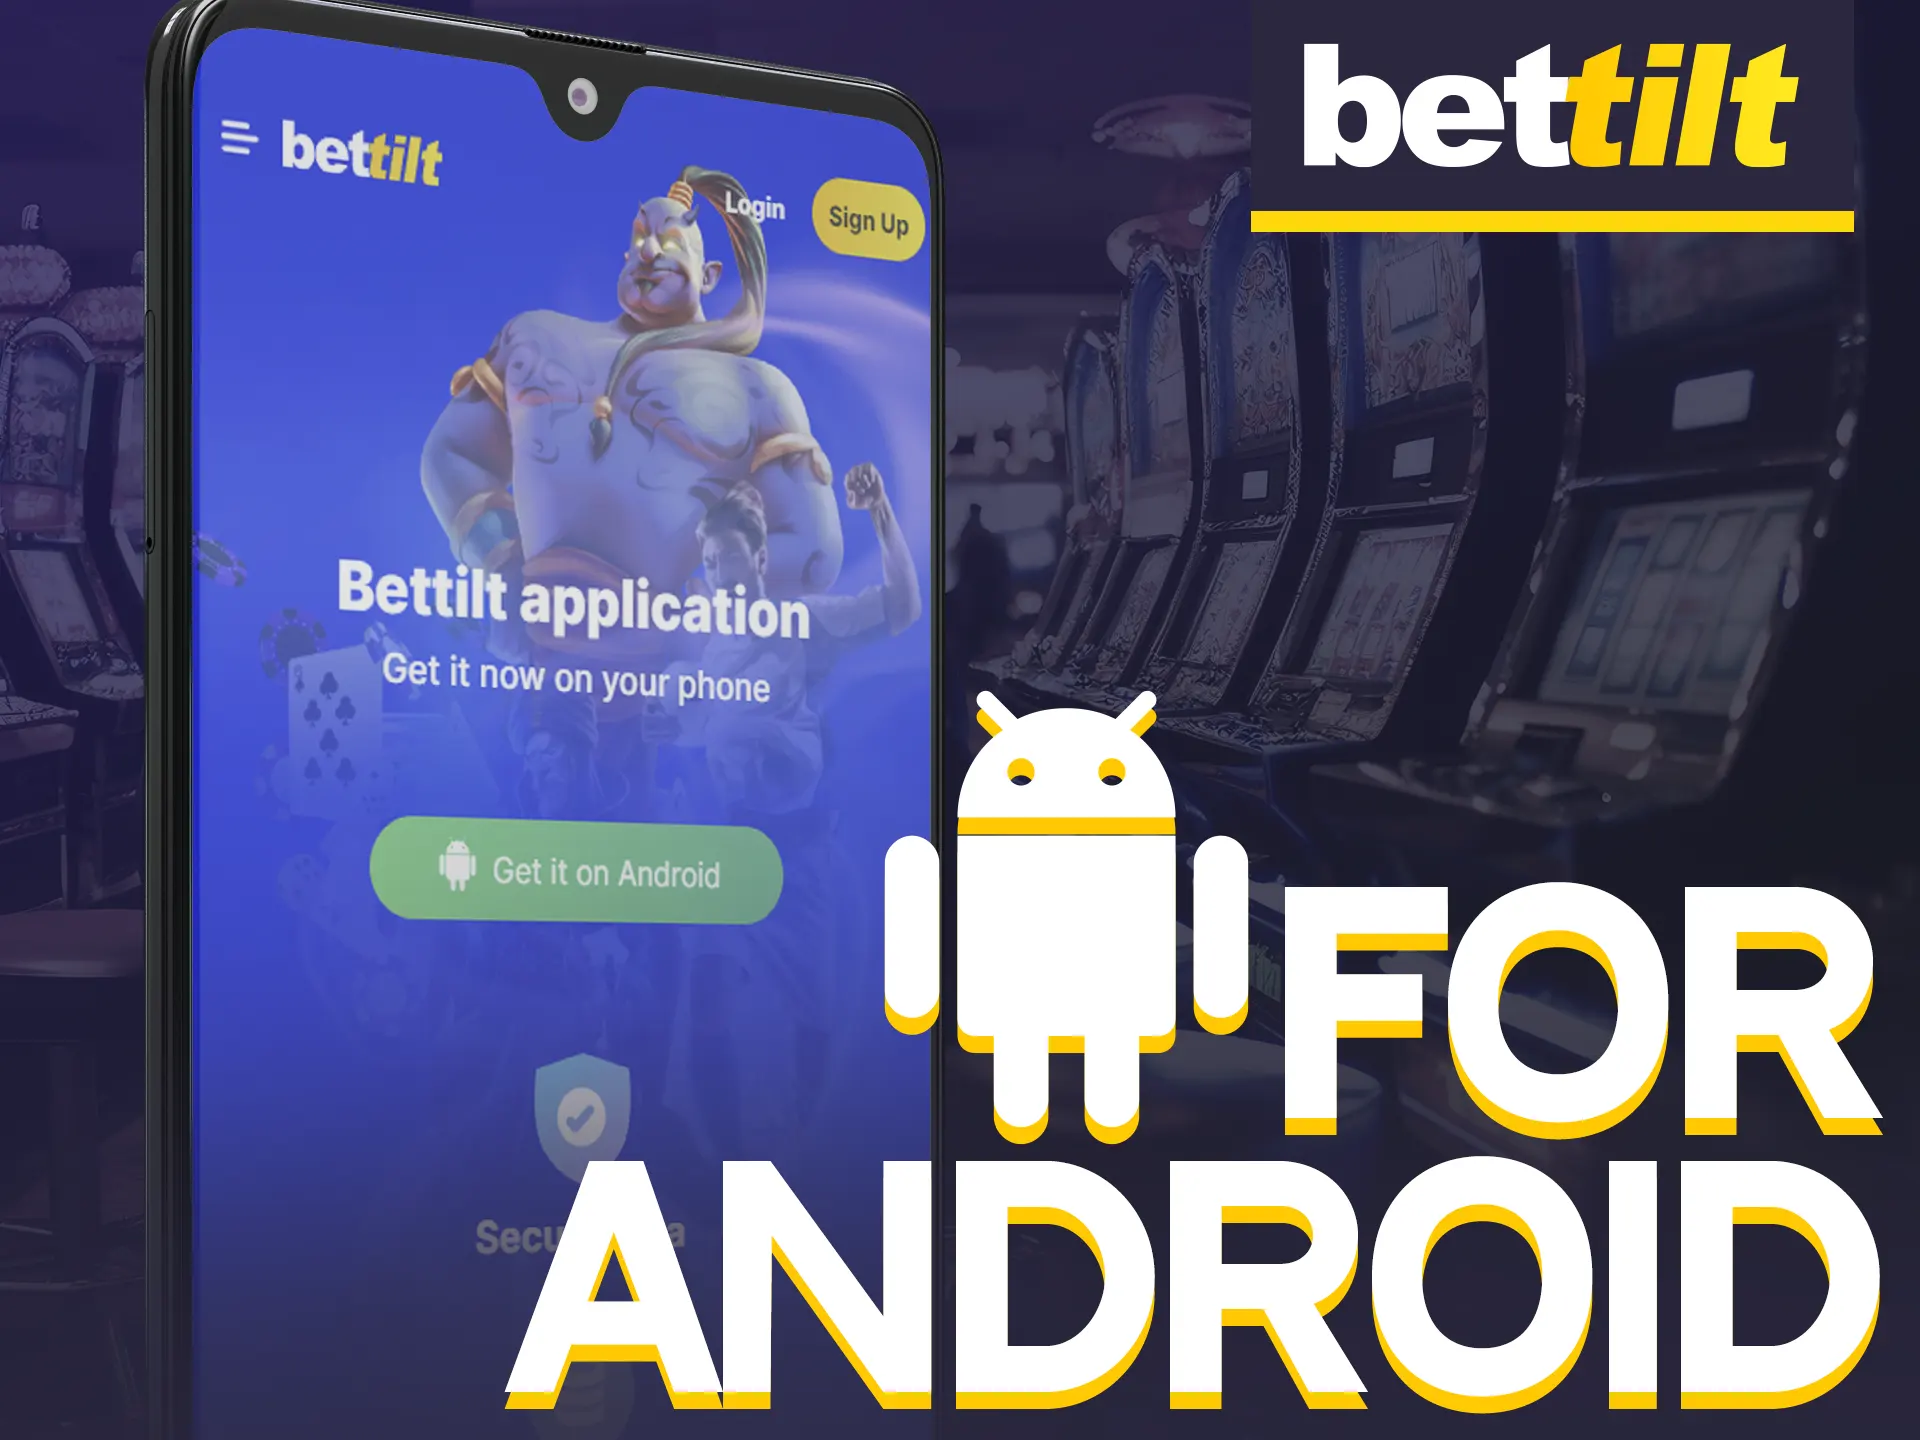 Bettilt Android app gives easy casino access.